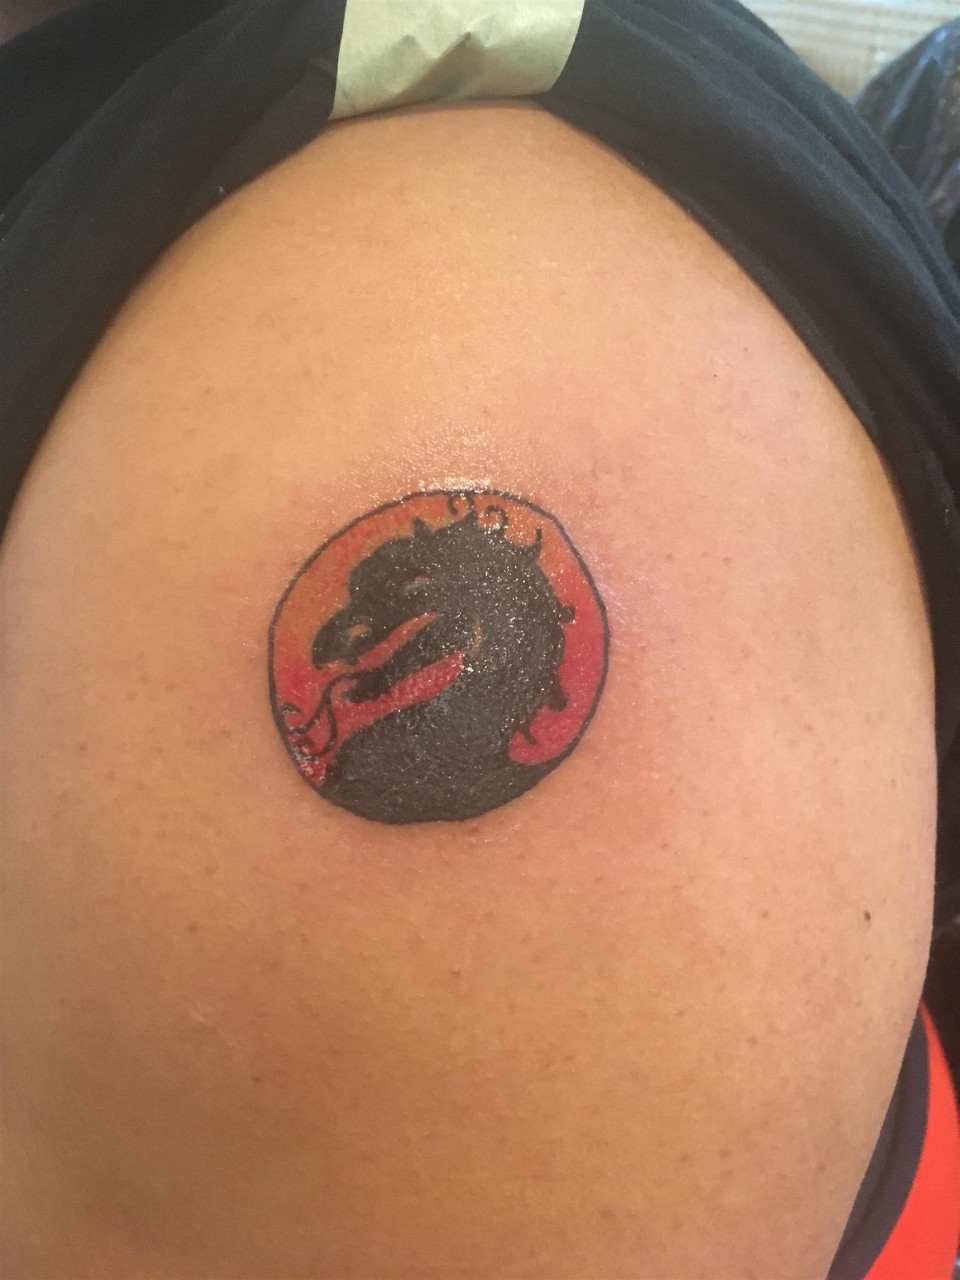 Queen of Steel Piercing and Tattoos  Mortal Kombat Tattoo for Chad   Tattooed by meoniawitch    MortalKombat MortalKombatTattoo  ScorpionMortalKombat ChestTattoo BlackAndGreyTattoo TattooOfTheDay  QueenOfSteel MeoniaWitch ILoveWhatIDo 